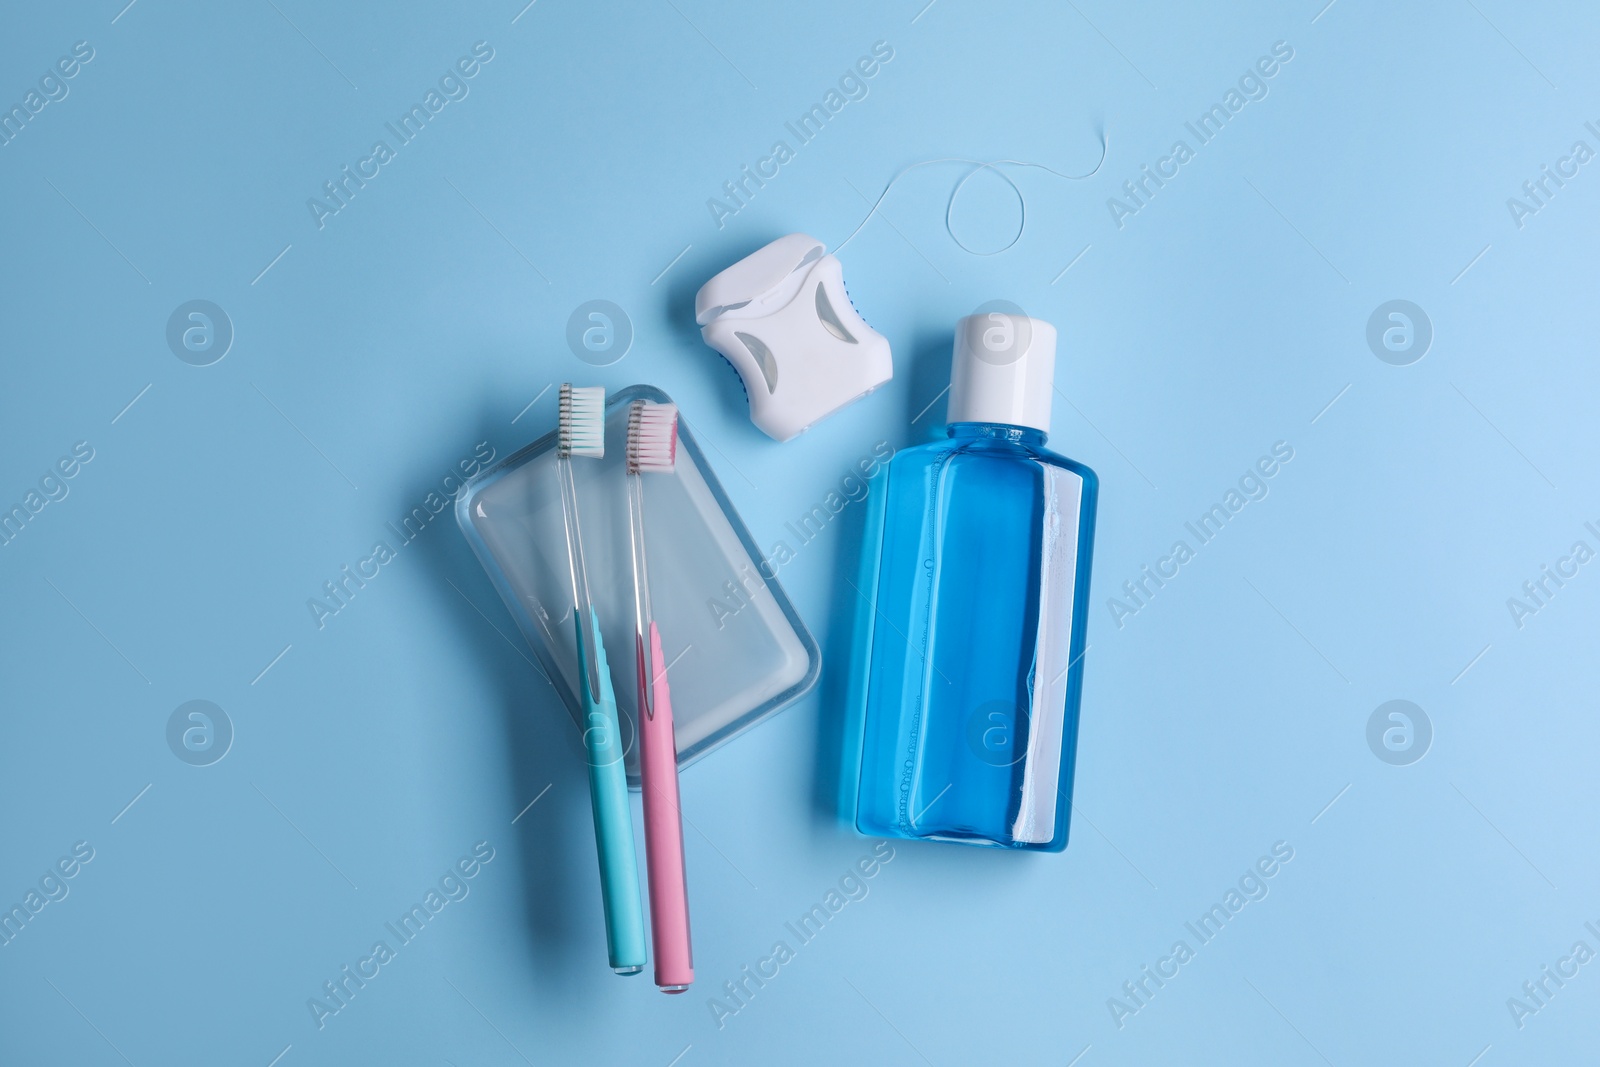 Photo of Fresh mouthwash in bottle, toothbrushes and dental floss on light blue background, flat lay